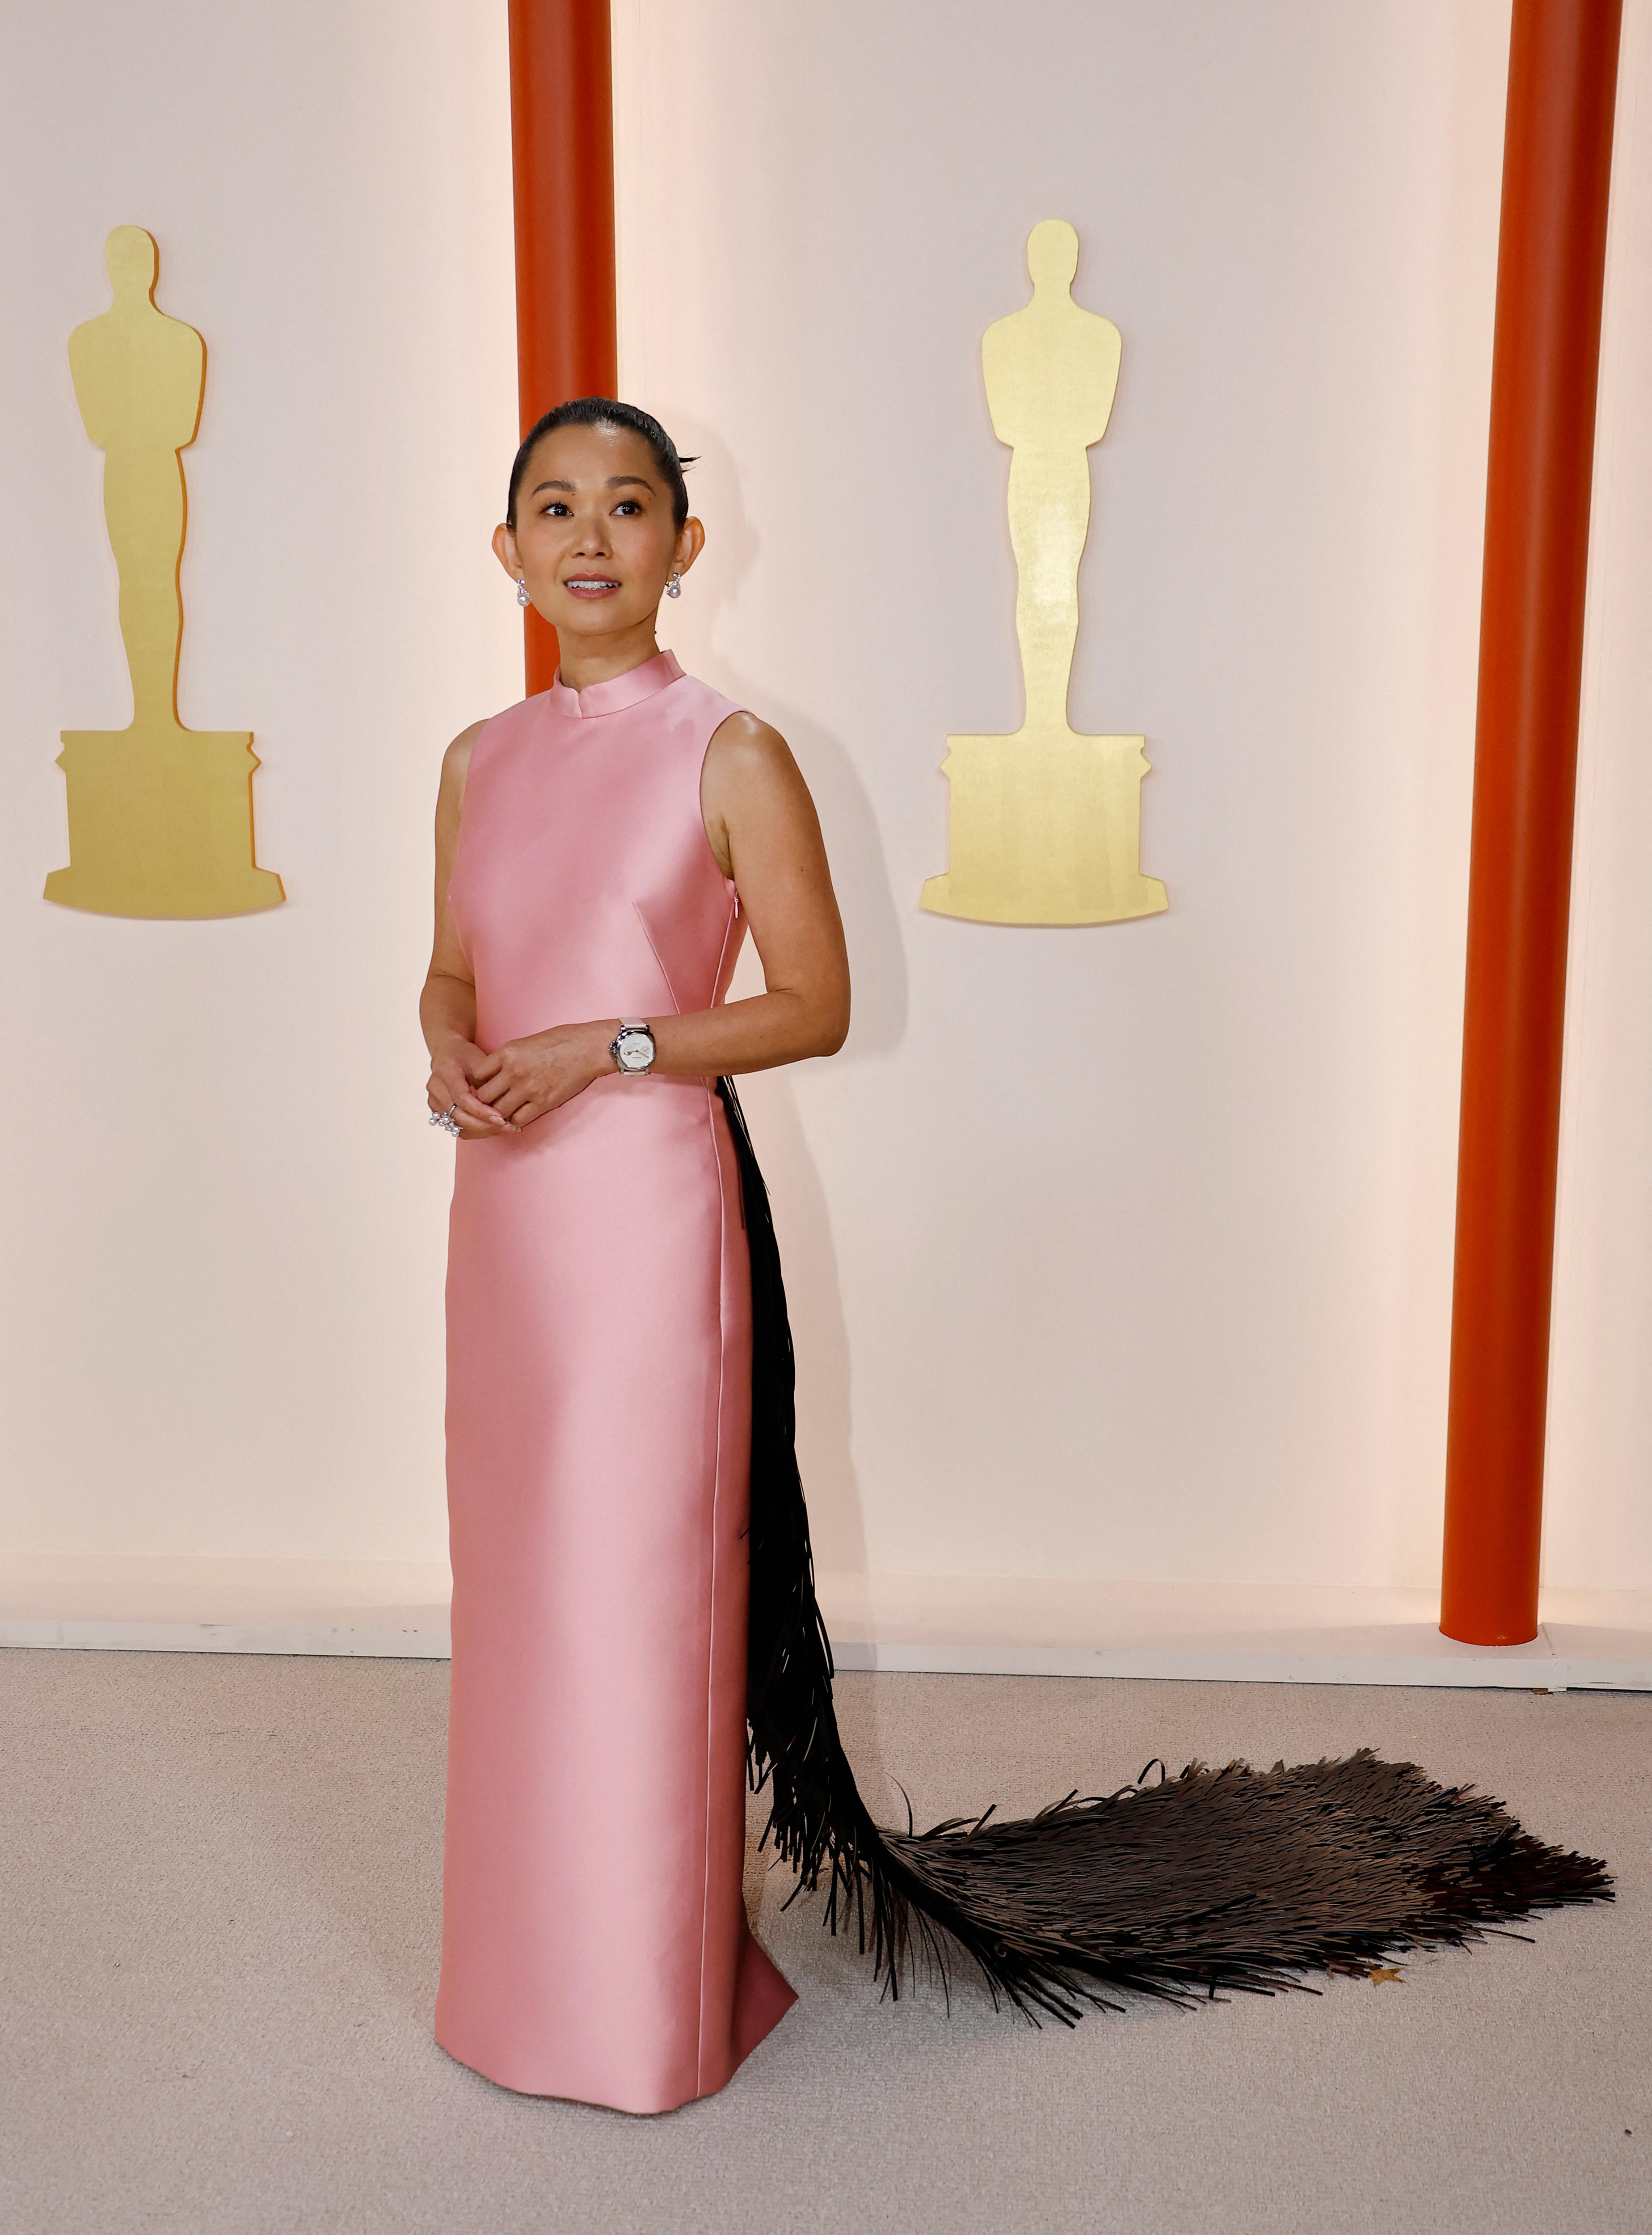 Hong Chau wearing a baby pink high neck sleeveless gown with a dark brown furry-looking train